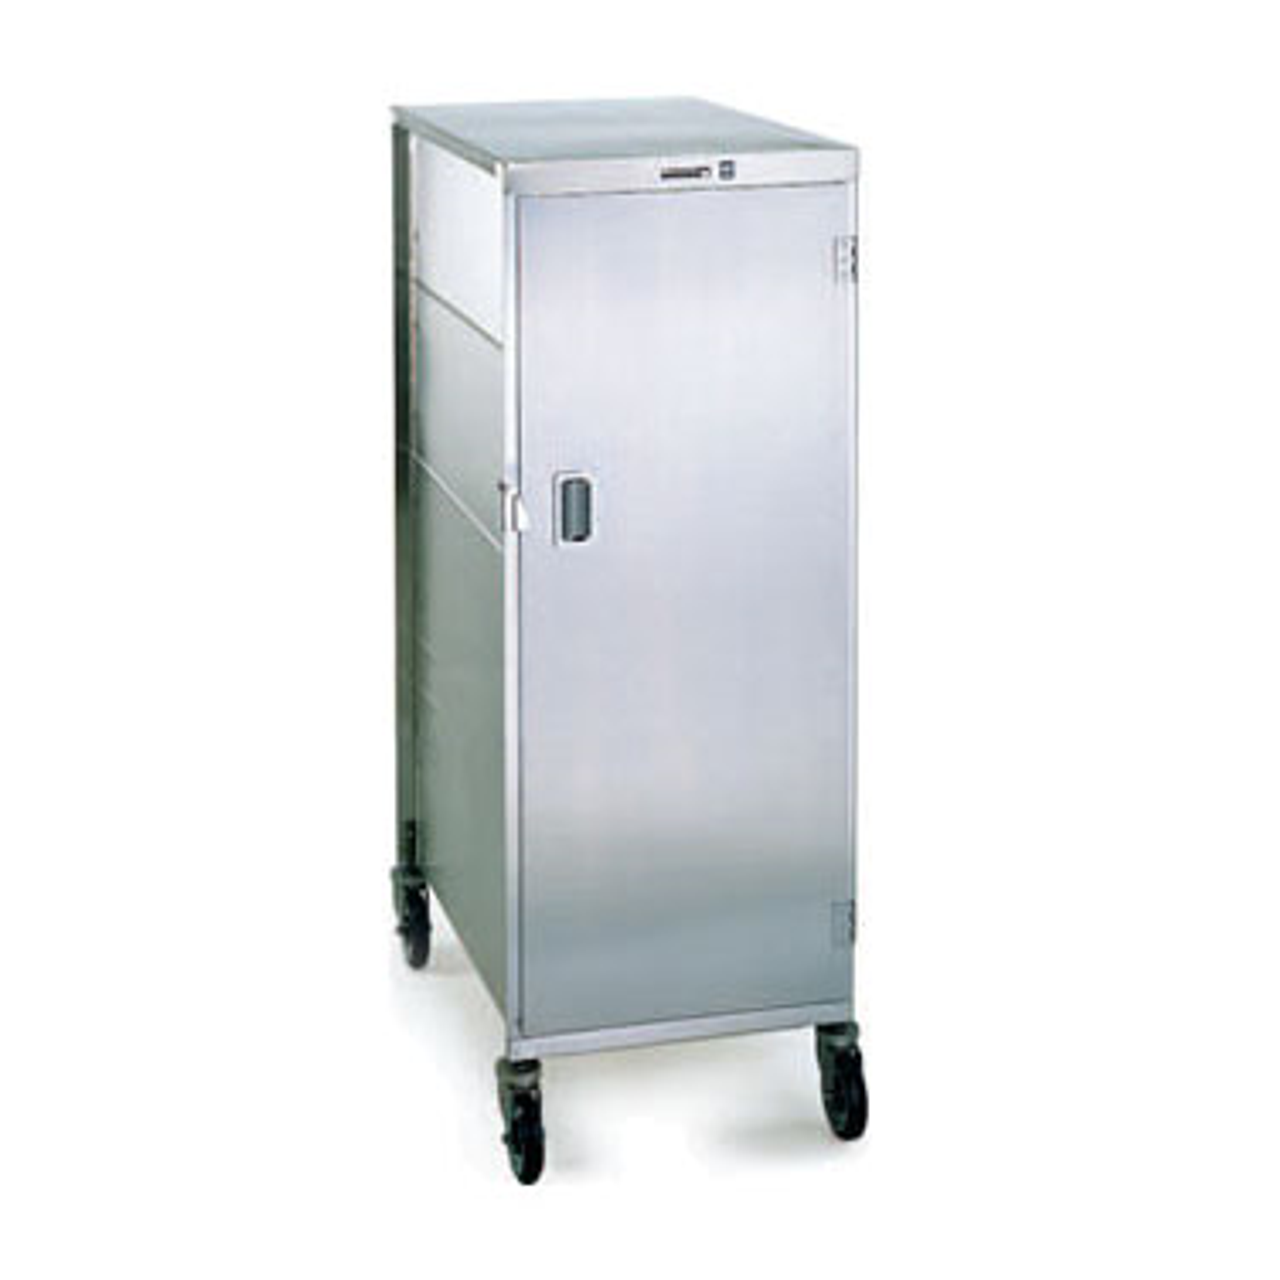 Tray Delivery Cart, enclosed-type, double door pass-thru, single compartment, (20) 14" x 18" tray capacity, (2) trays per ledge, 6" spacing, 270° door swing, 5" swivel casters, 200/300 stainless steel construction, NSF, Made in USA